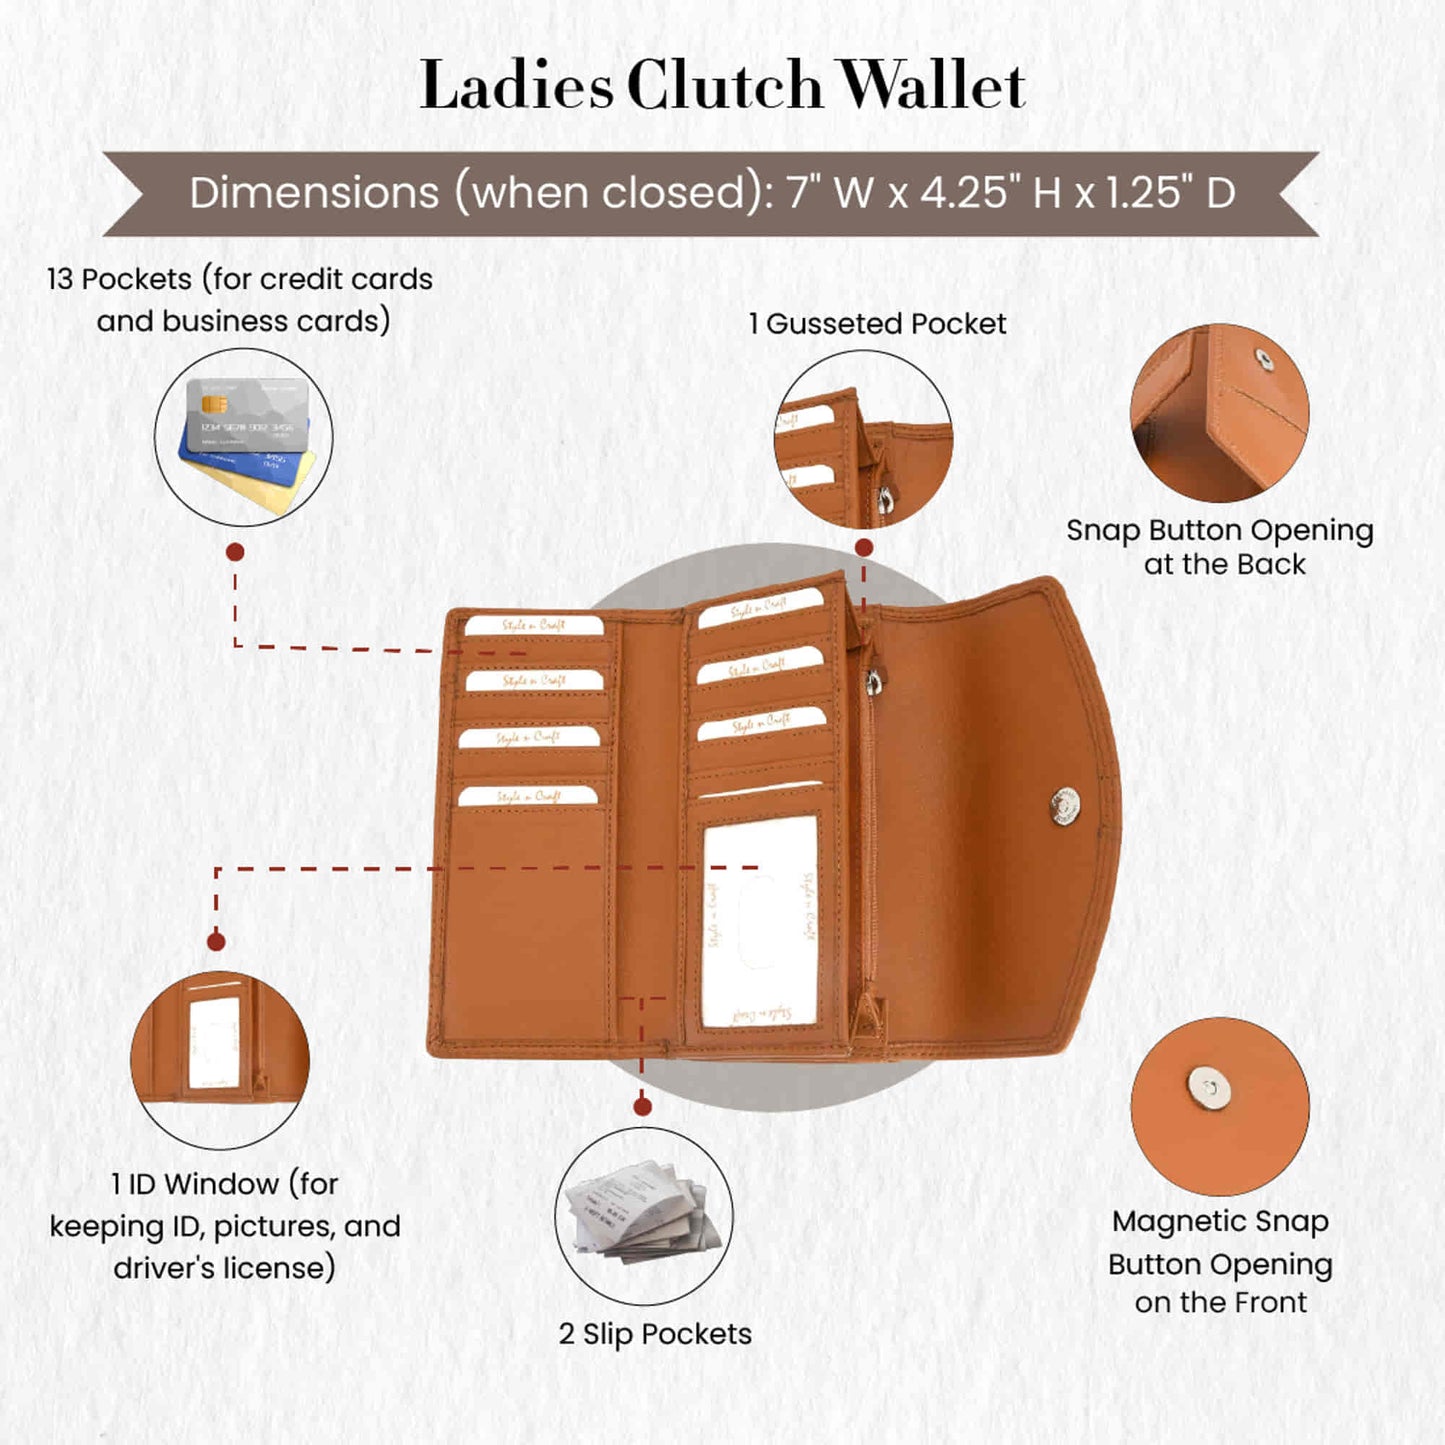 Style n Craft 300954-CG Clutch Wallet for Ladies in Cow Leather - Tan Color - Front Open Inside View Showing the Details